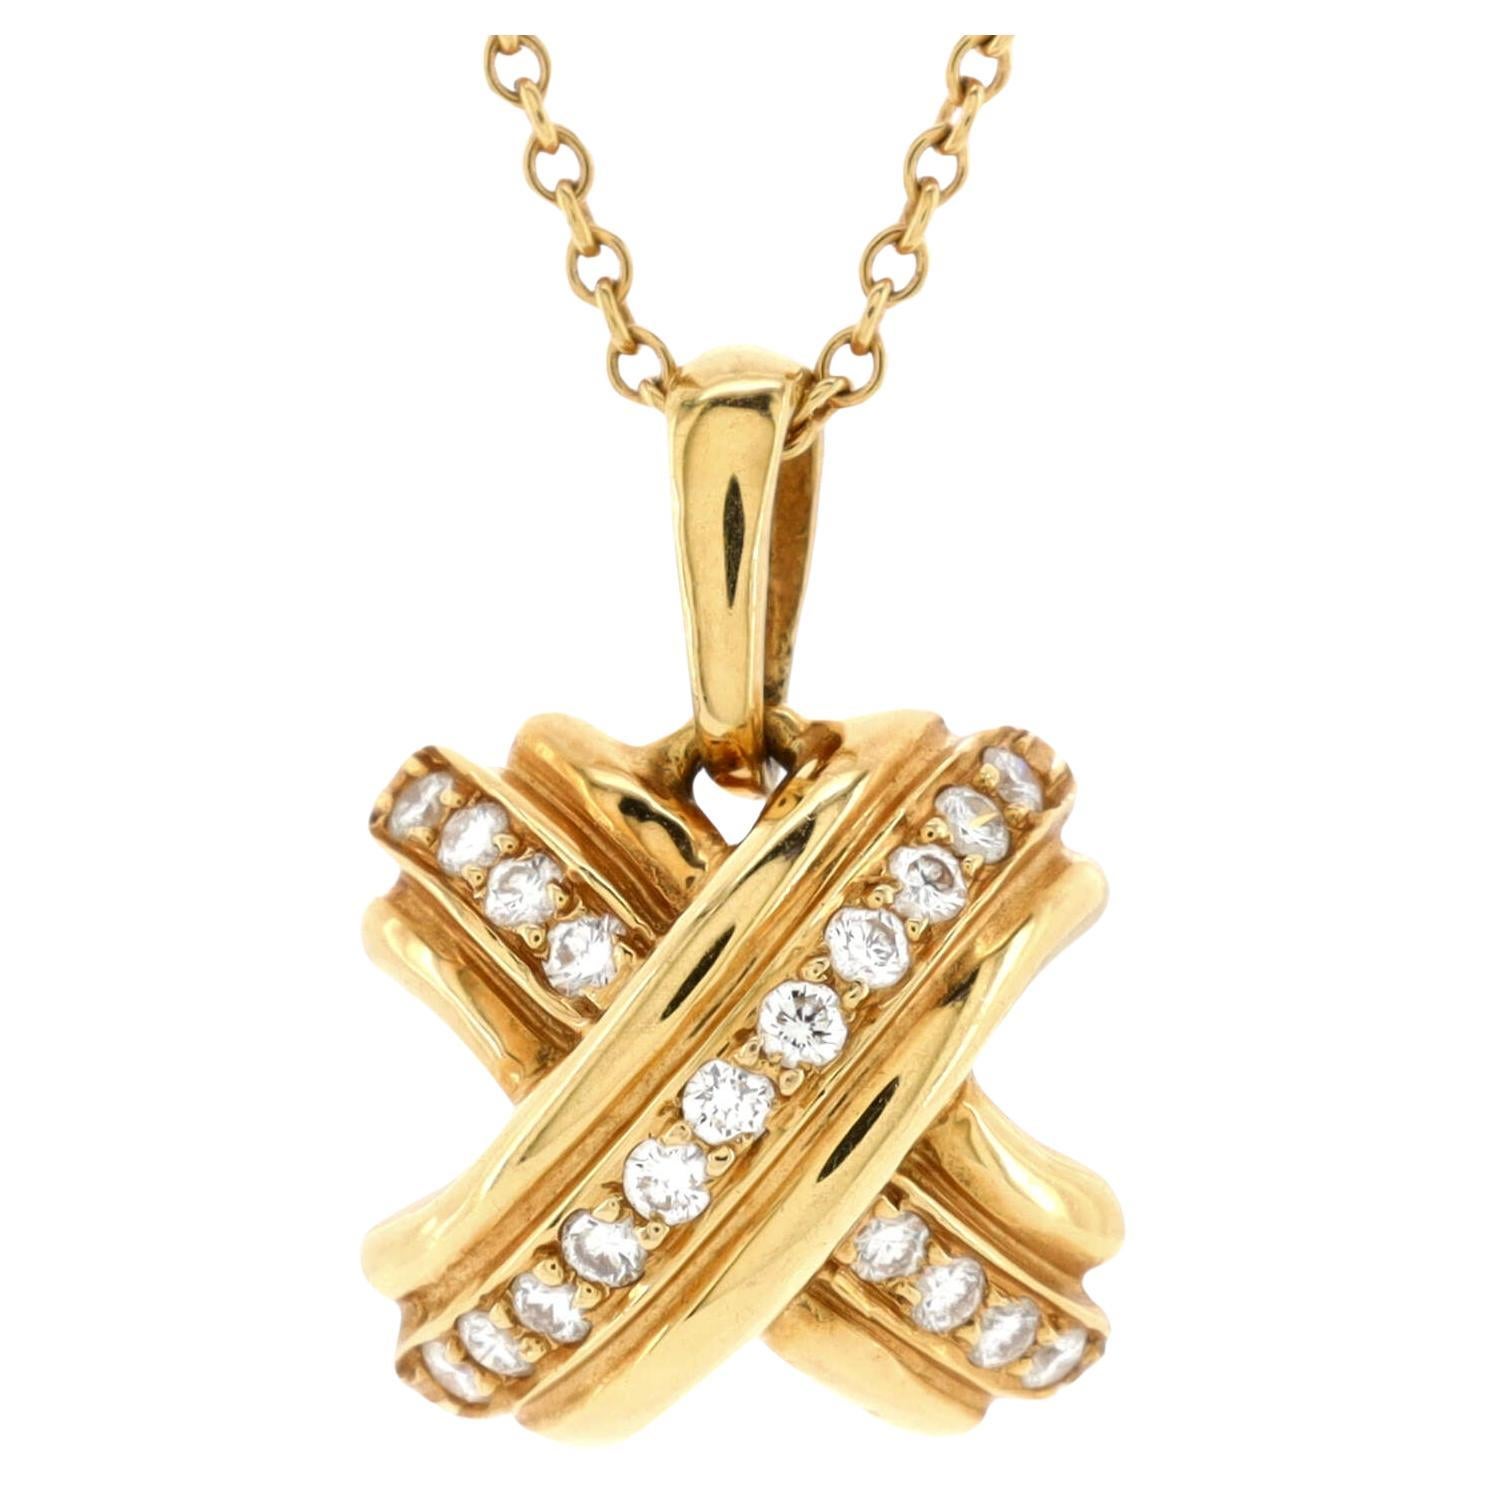 Tiffany & Co. Signature X Pendant Necklace 18K Yellow Gold with Diamonds